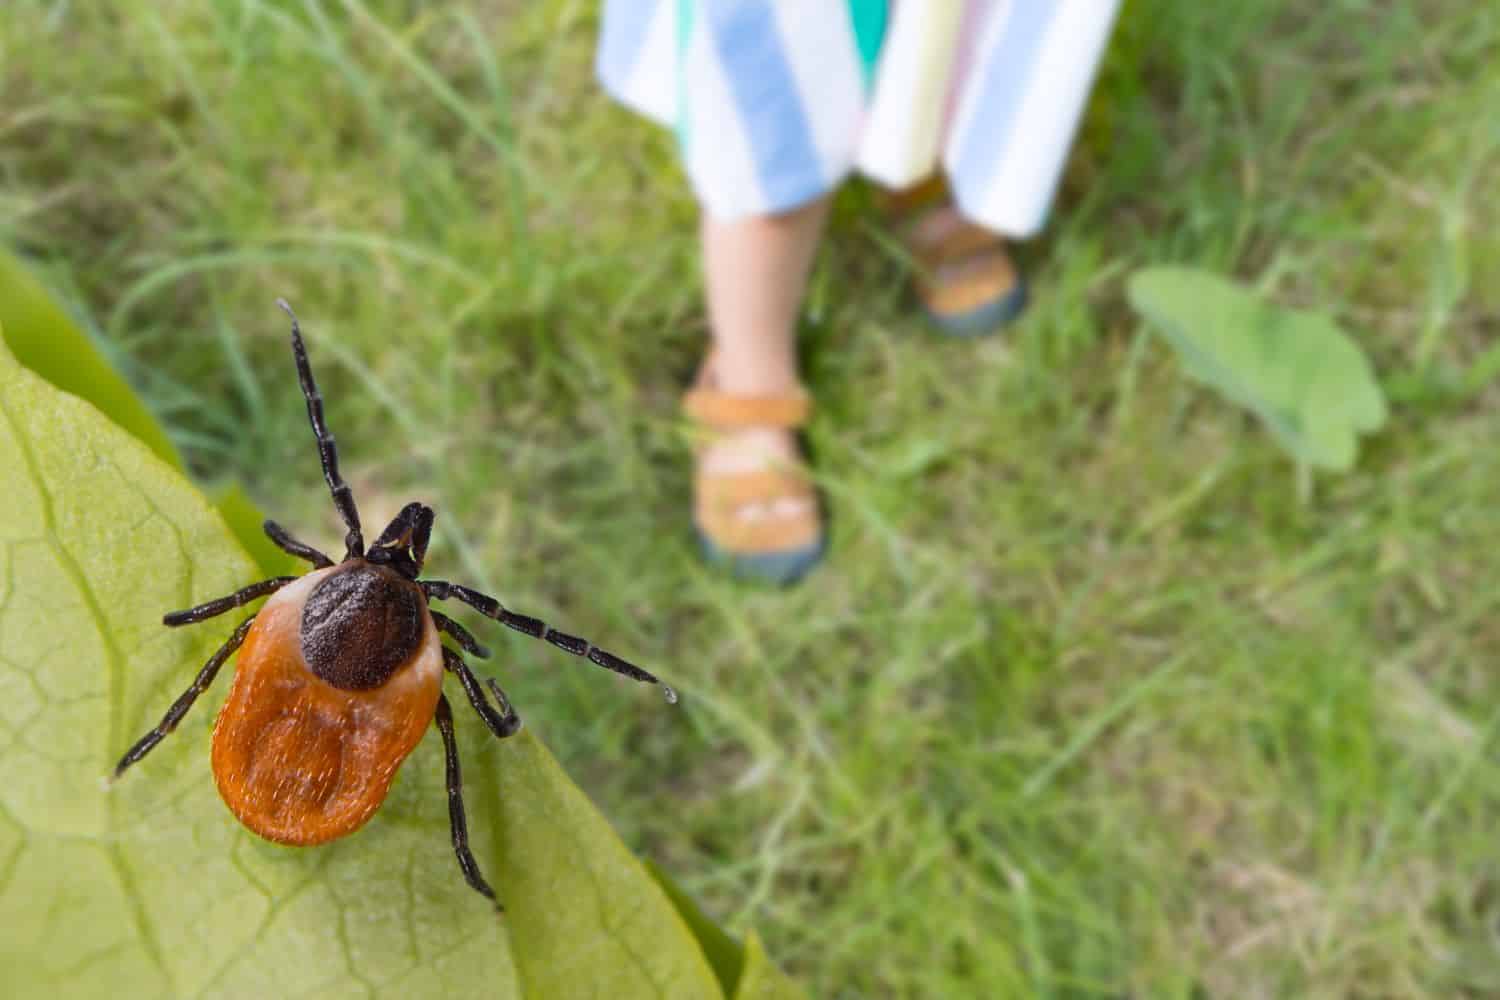 Prevent Tick Borne Diseases While Outdoors